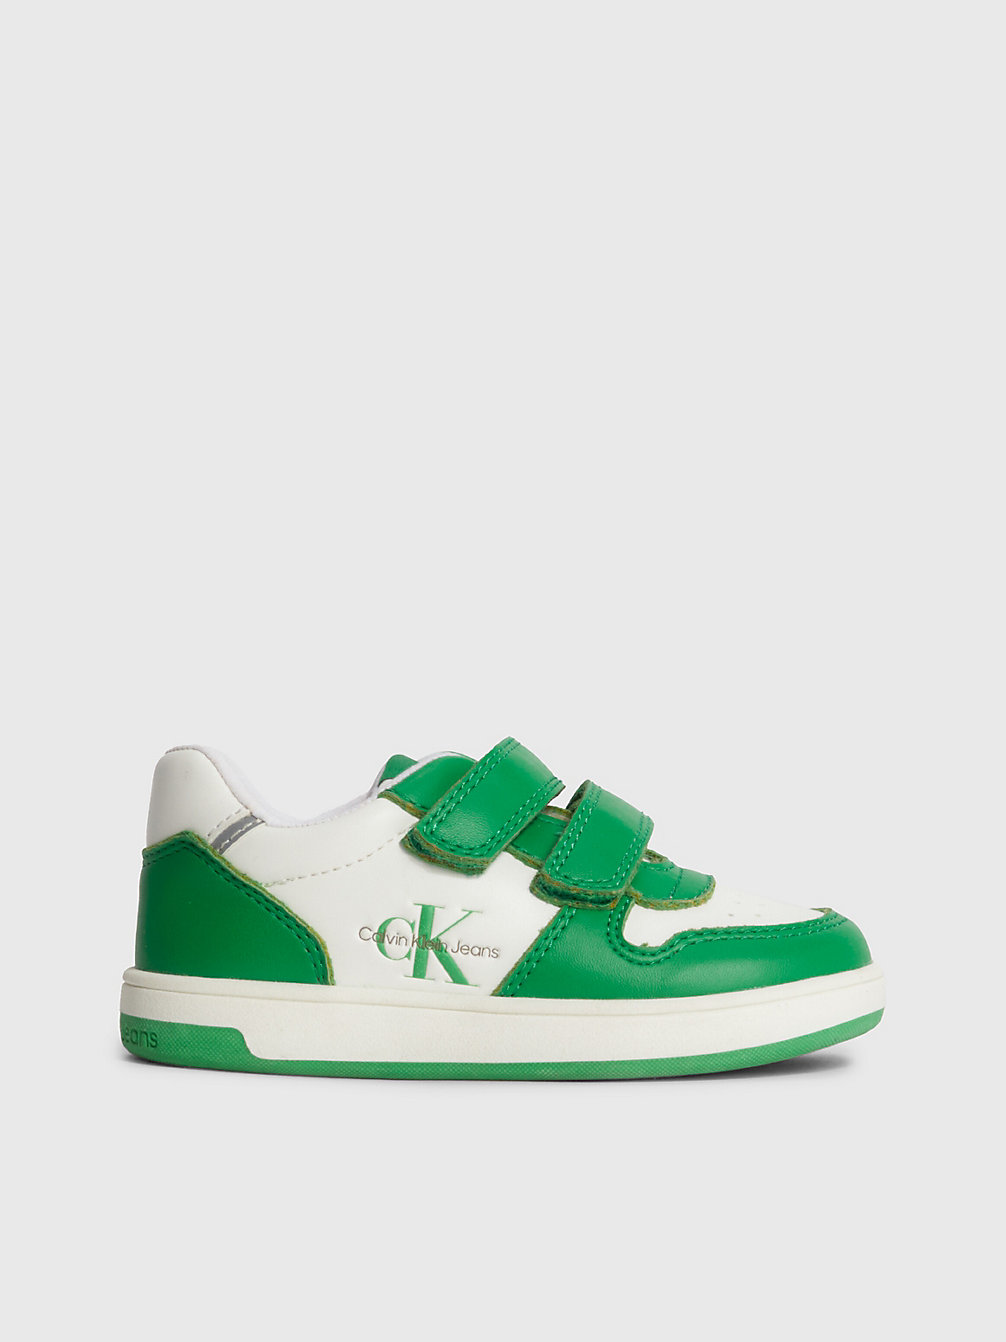 GREEN / WHITE Toddlers And Kids Velcro Trainers undefined kids unisex Calvin Klein